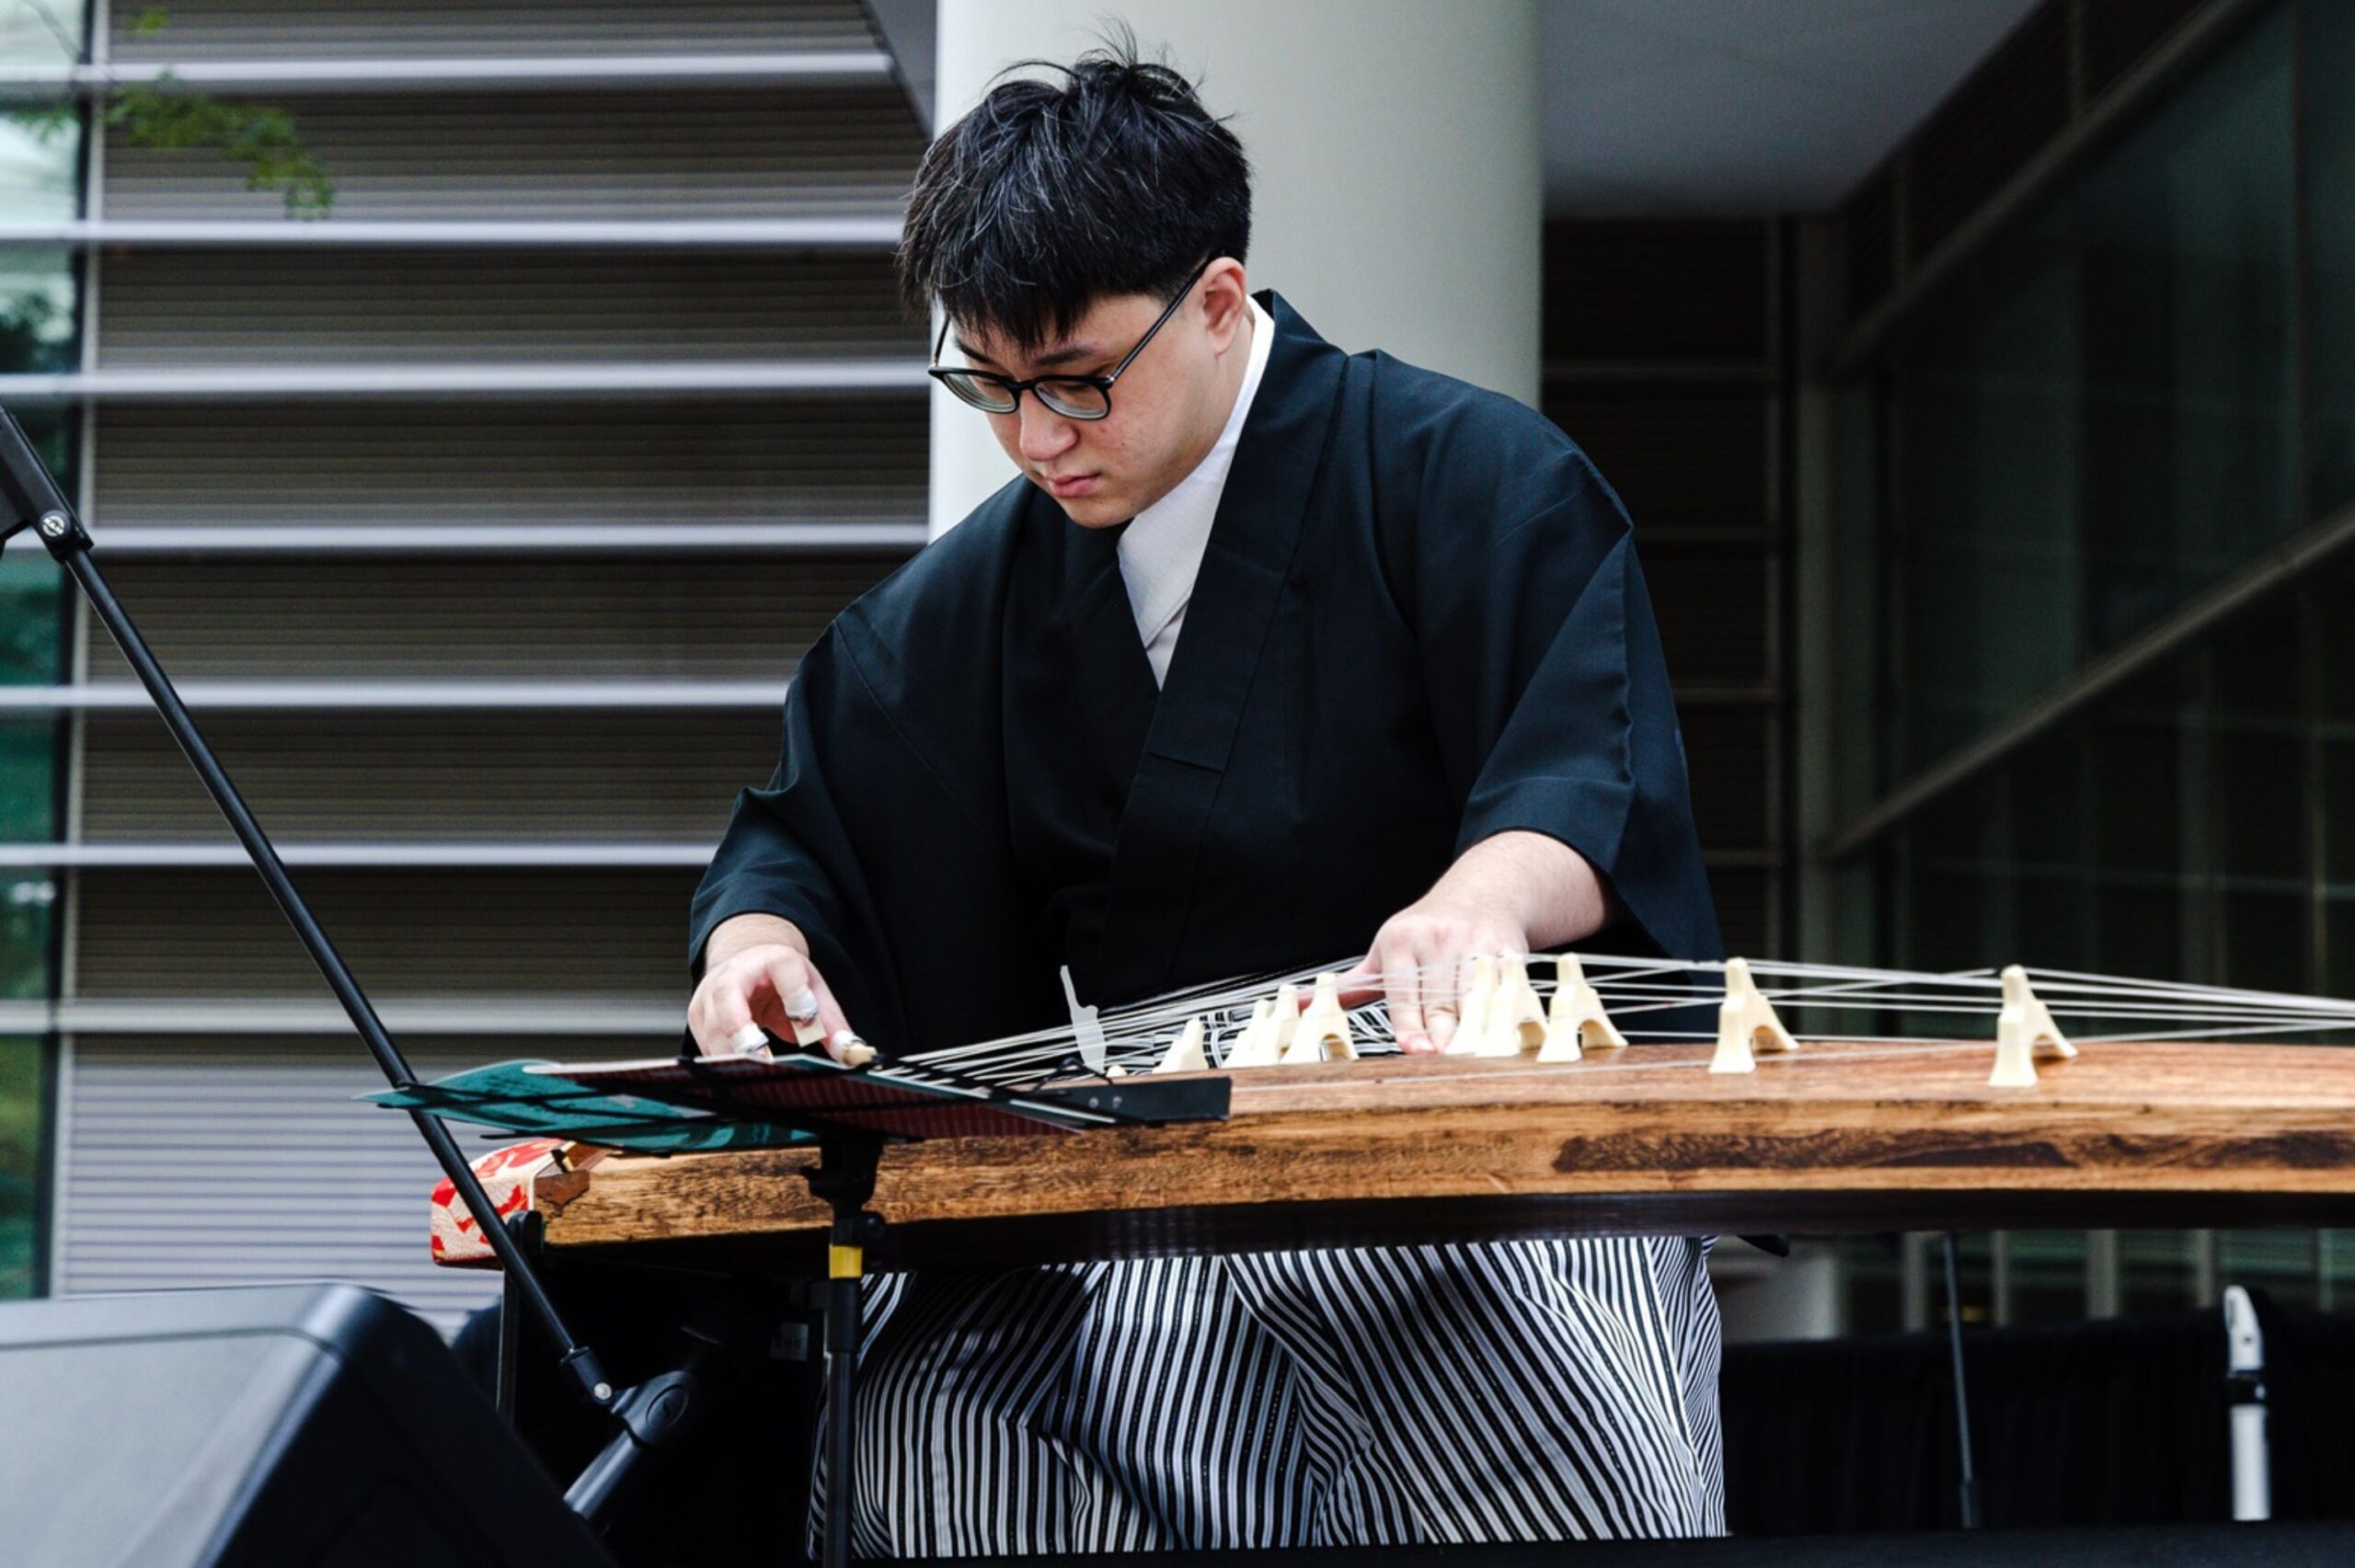 Hayden Chua from NUS Japanese Studies Society’s KotoKottoN performed on the Koto, a 13-string Japanese zither.